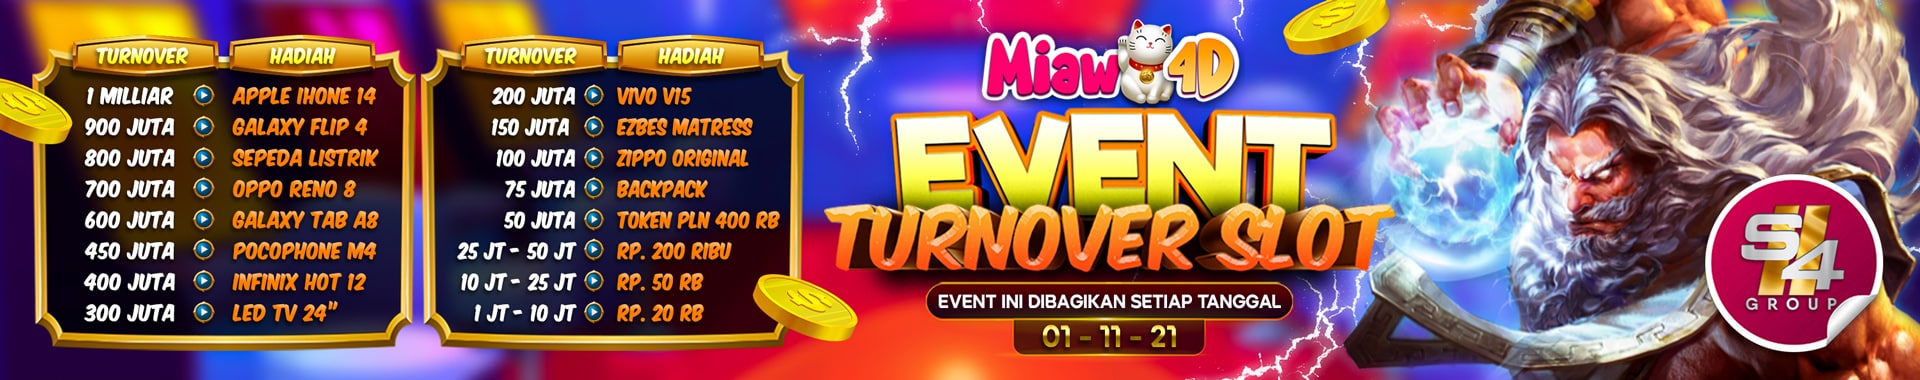 EVENT TURN OVER MIAW4d